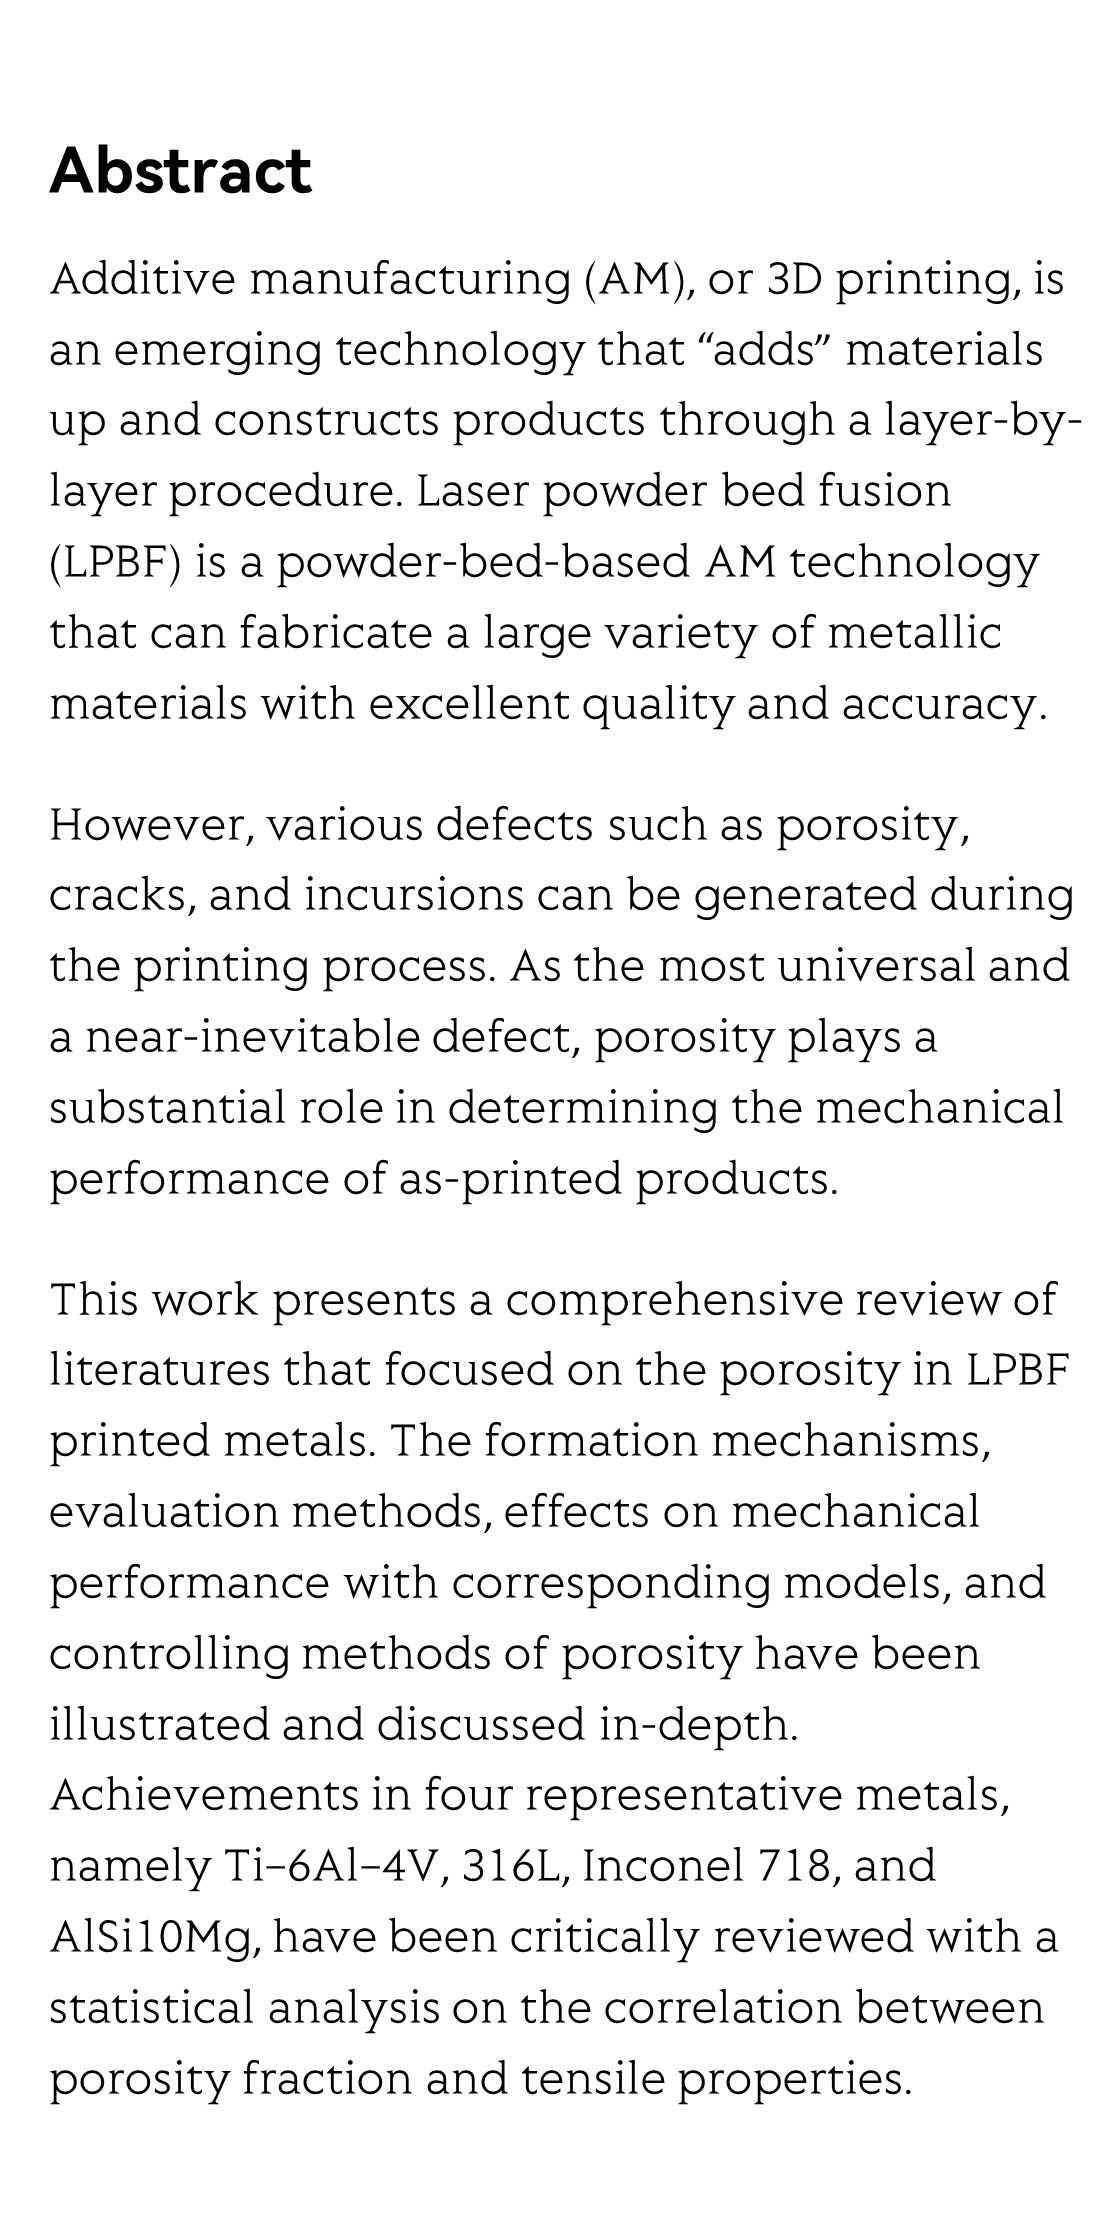 A review and a statistical analysis of porosity in metals additively manufactured by laser powder bed fusion_2